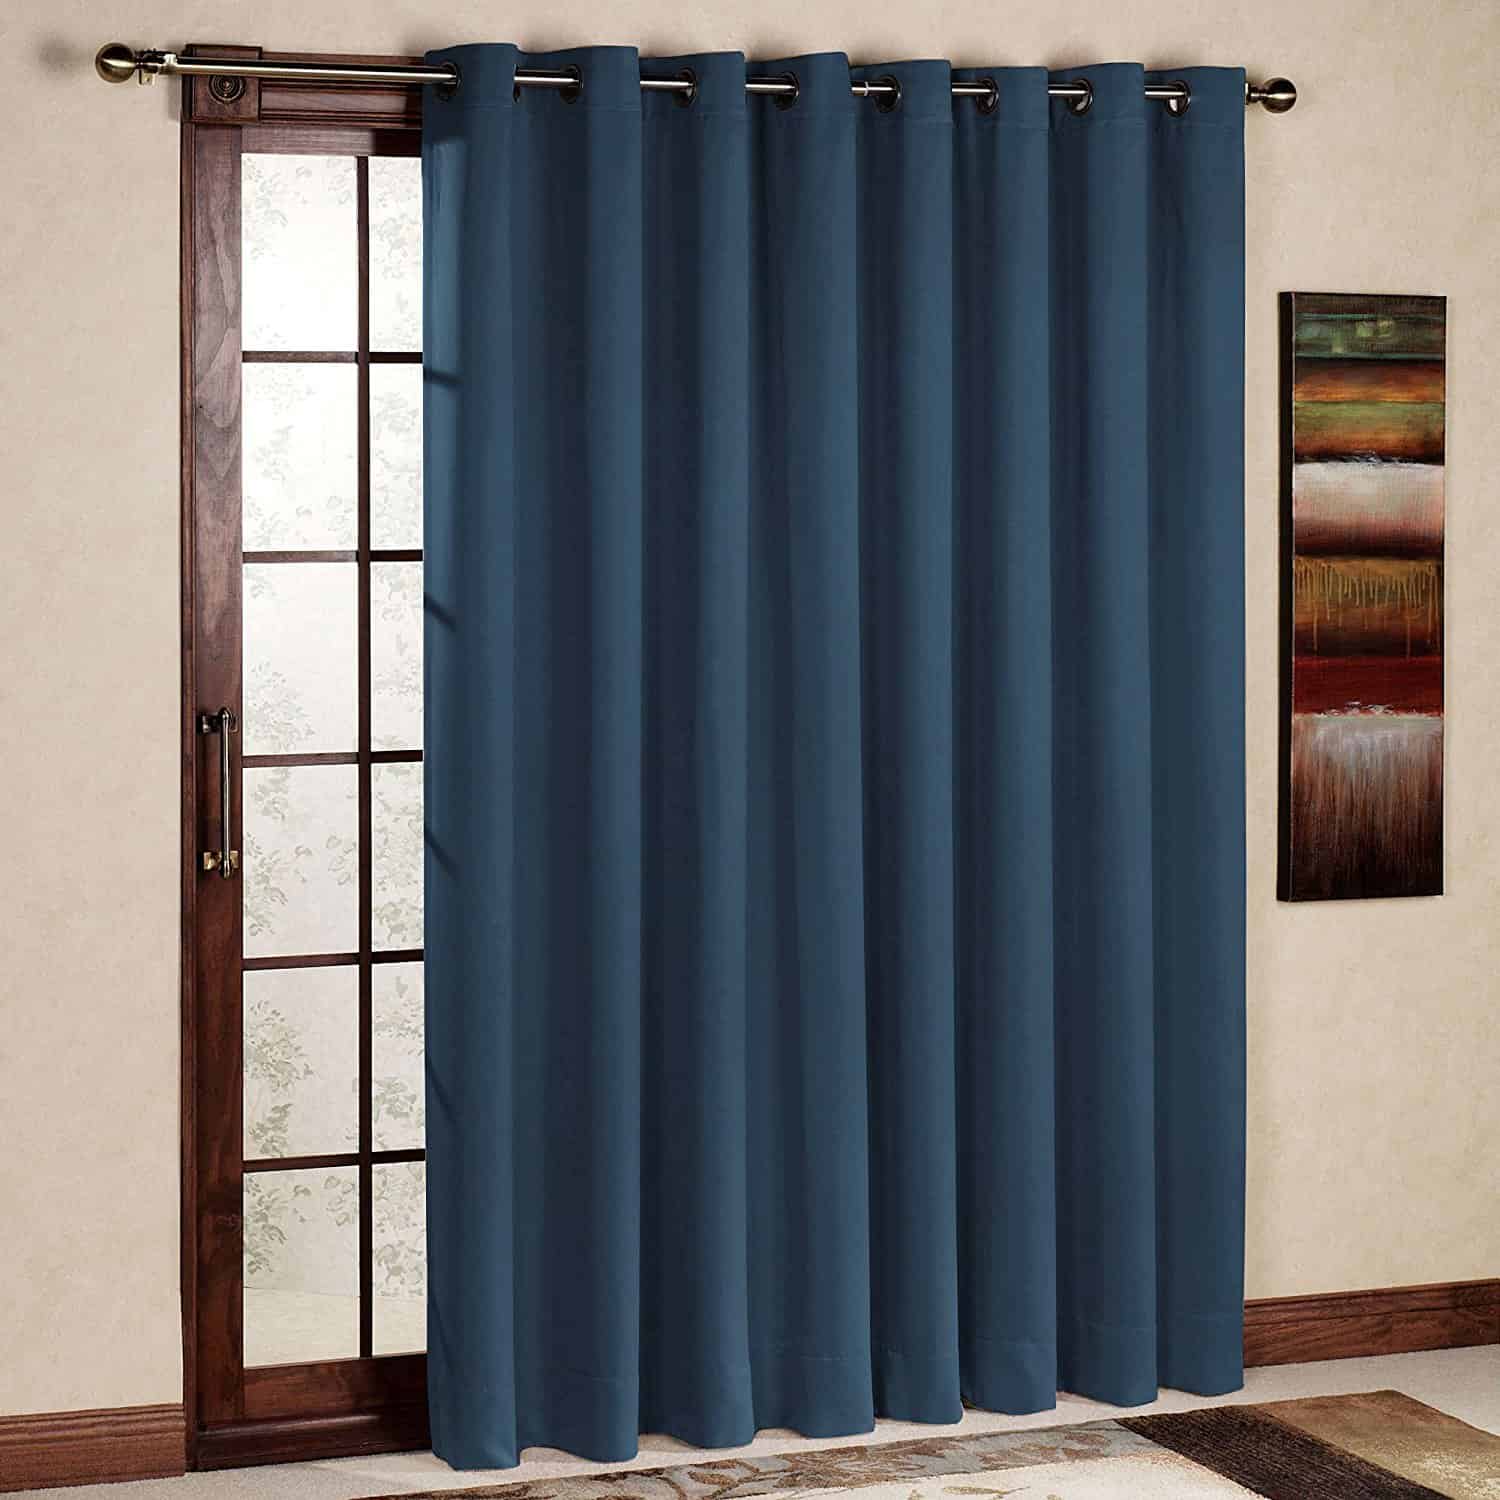 Window Treatments For Sliding Glass, Patio Door Curtains Or Shades